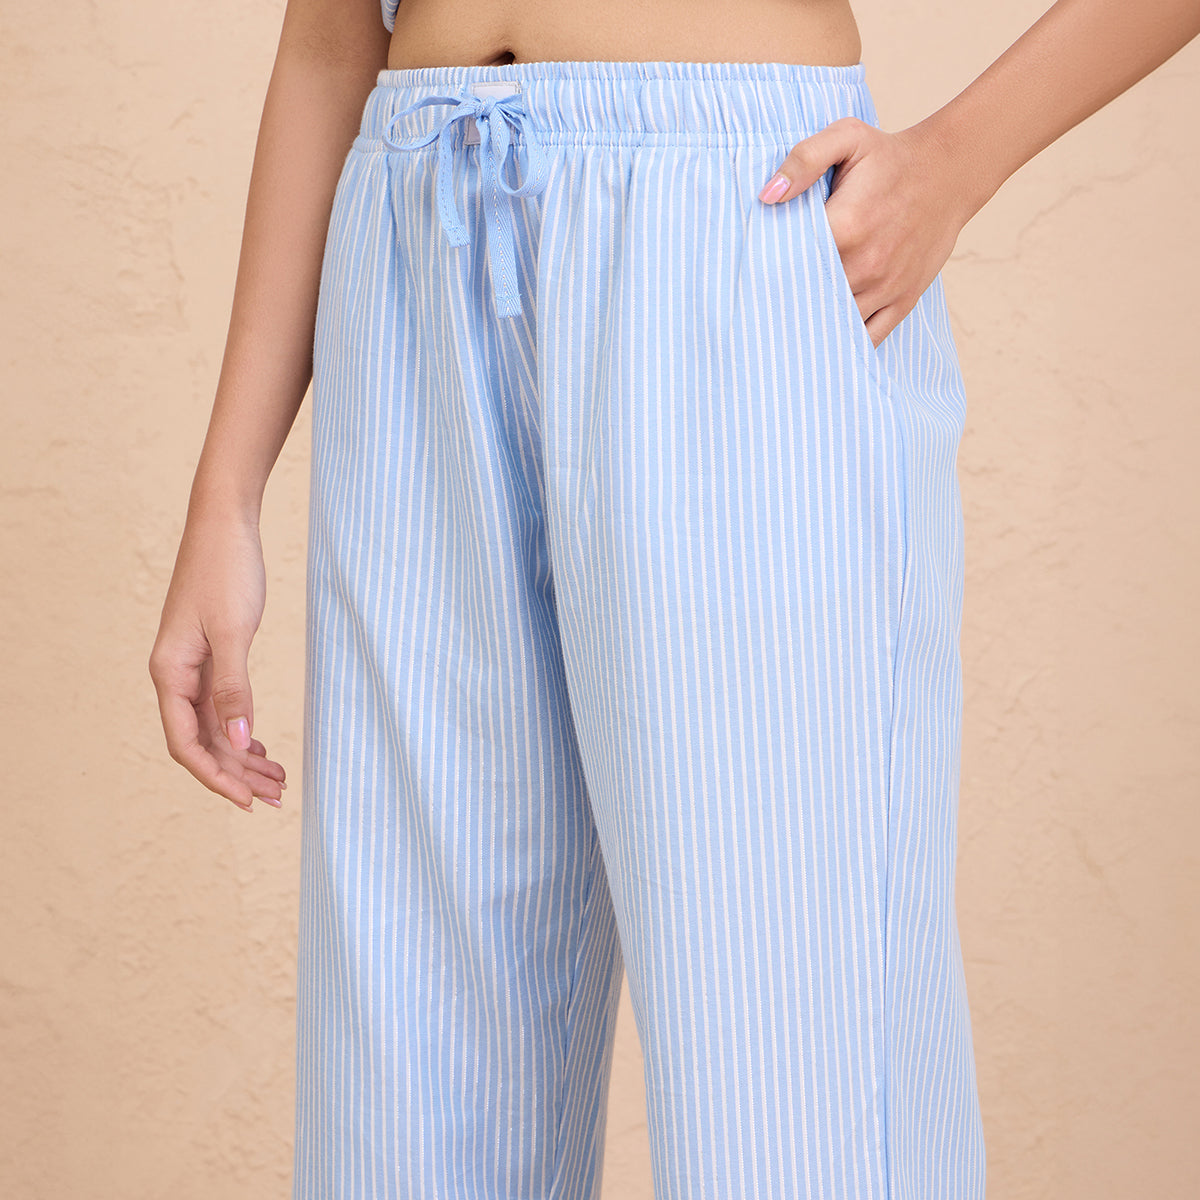 Nykd By Nykaa Super Comfy Cotton Relax Fit Pajama-NYS141-Blue Stripe